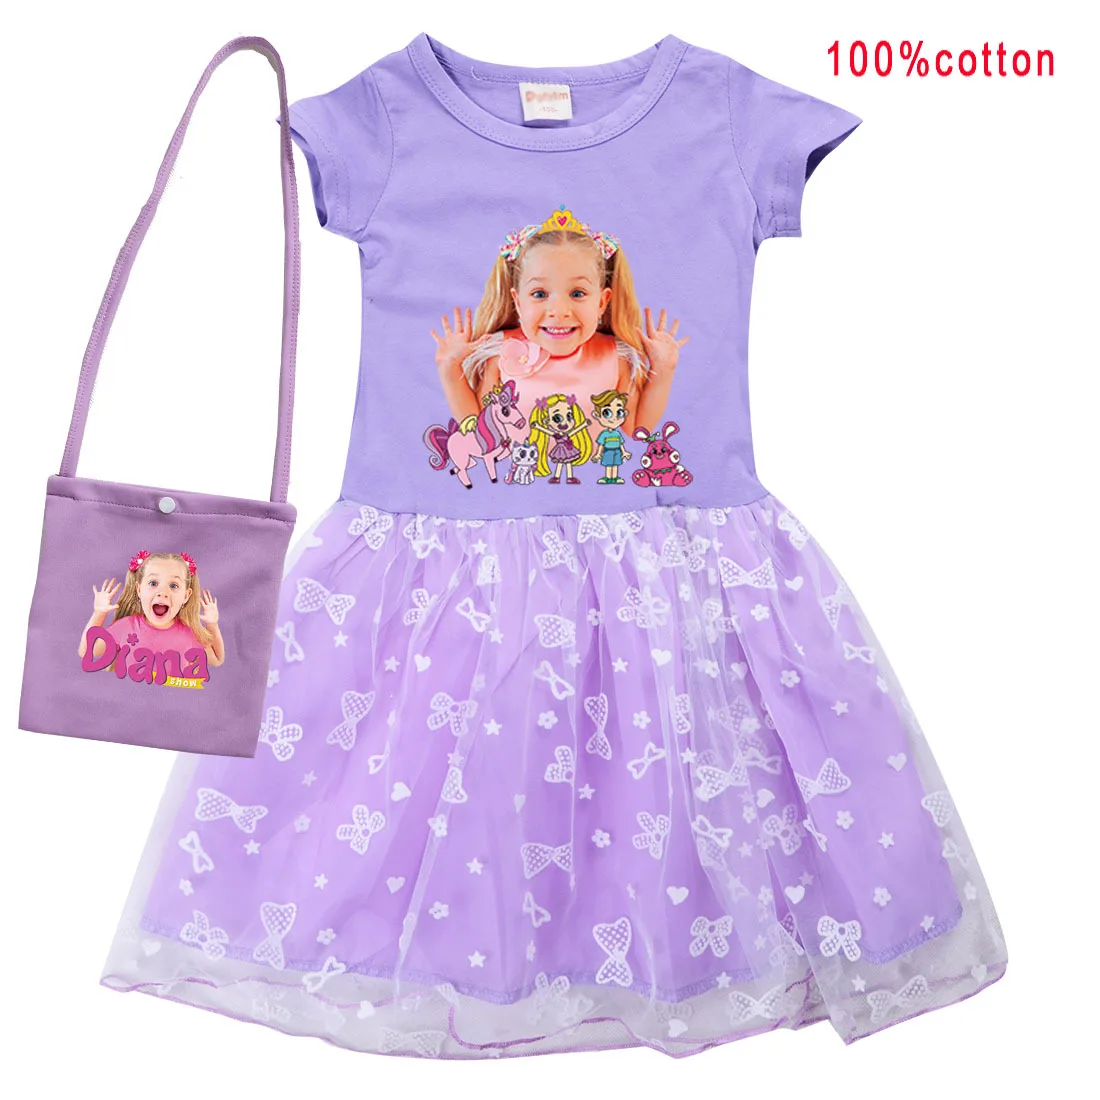 

Kids Diana and Roma Show Clothes Baby Girls Casual Dresses Children Halloween Carnival Cosplay Costume Short Sleeve Dress & Bag